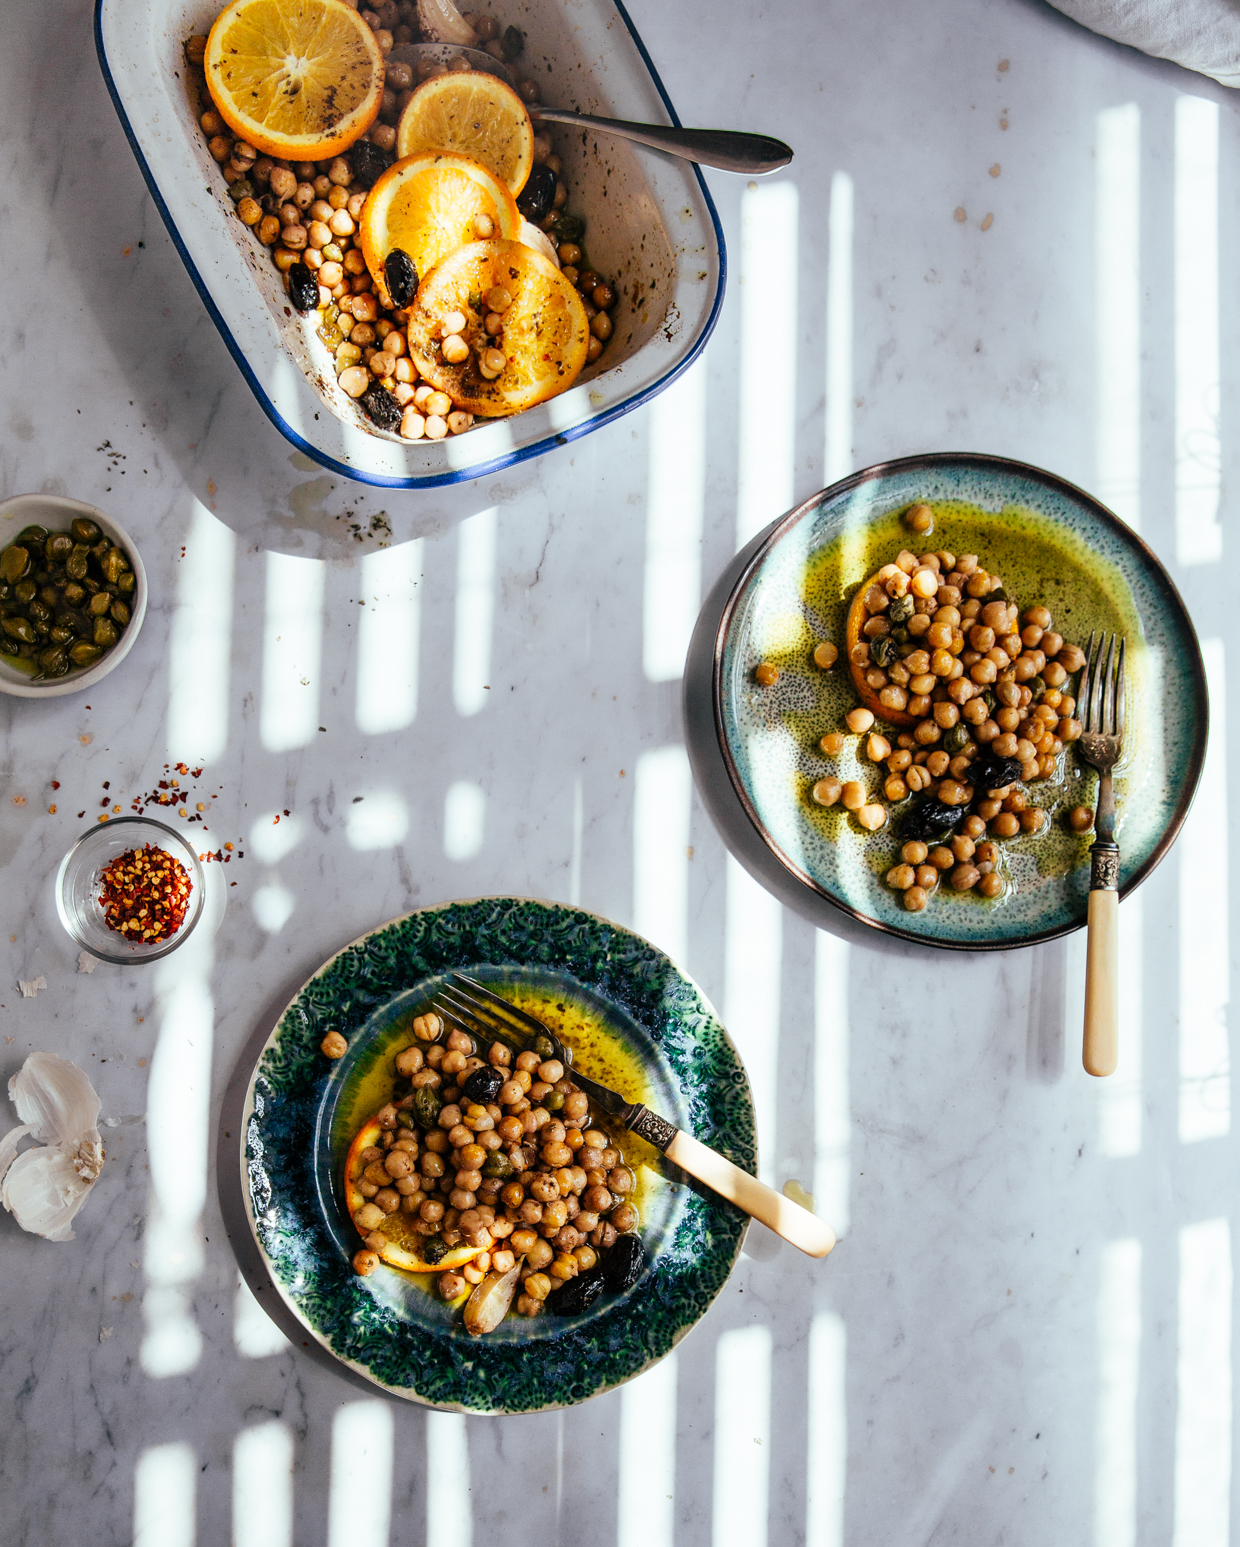 Baked chickpeas with capers, olives & orange